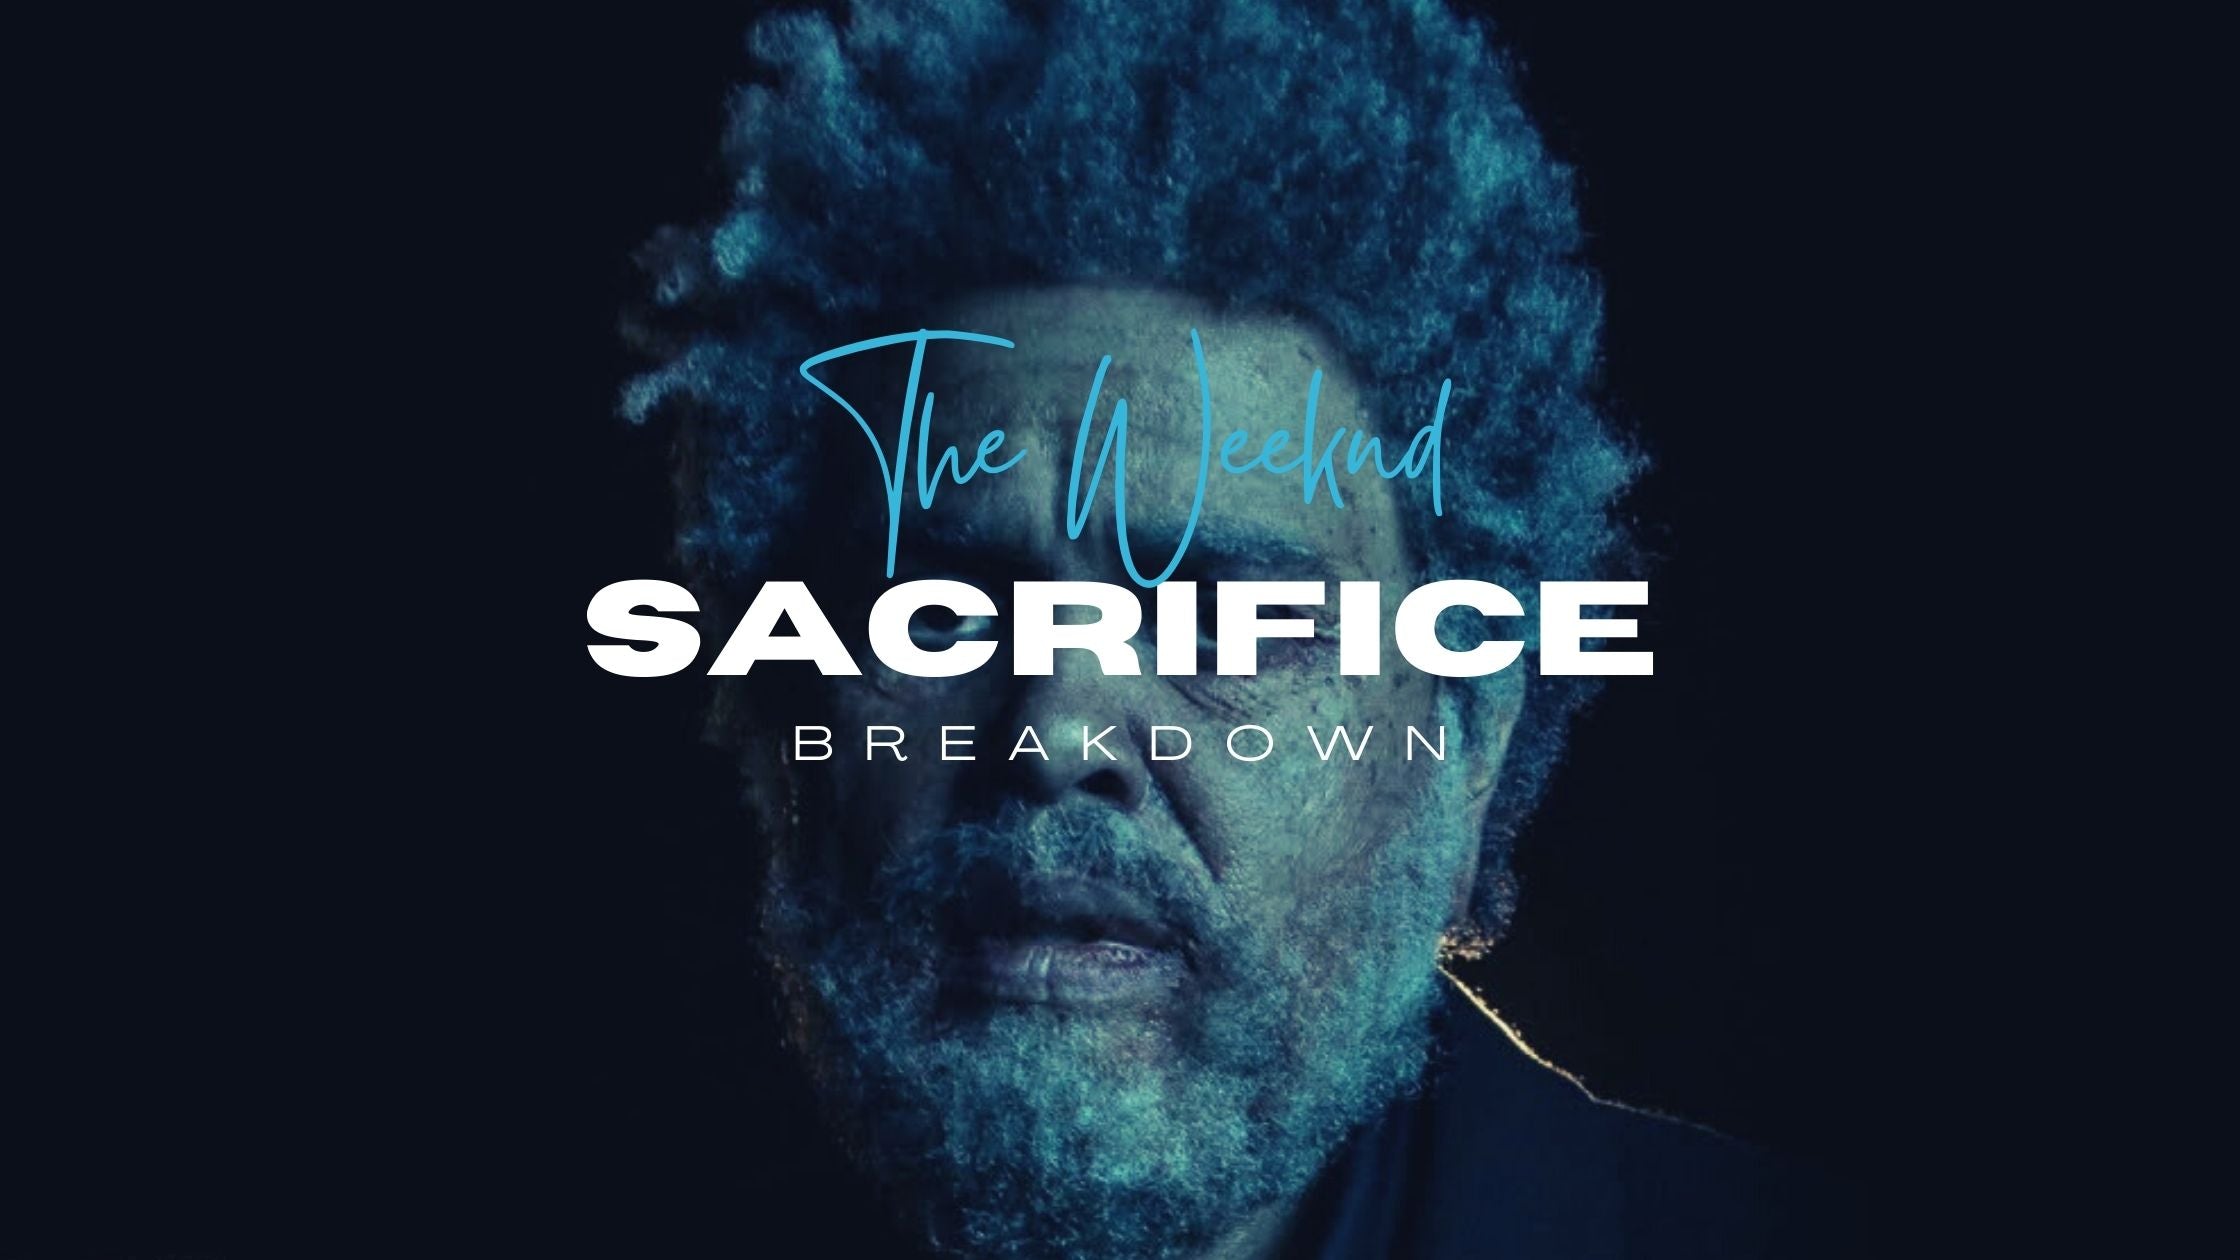 Sacrifice - The Weeknd - Instrumental Cover